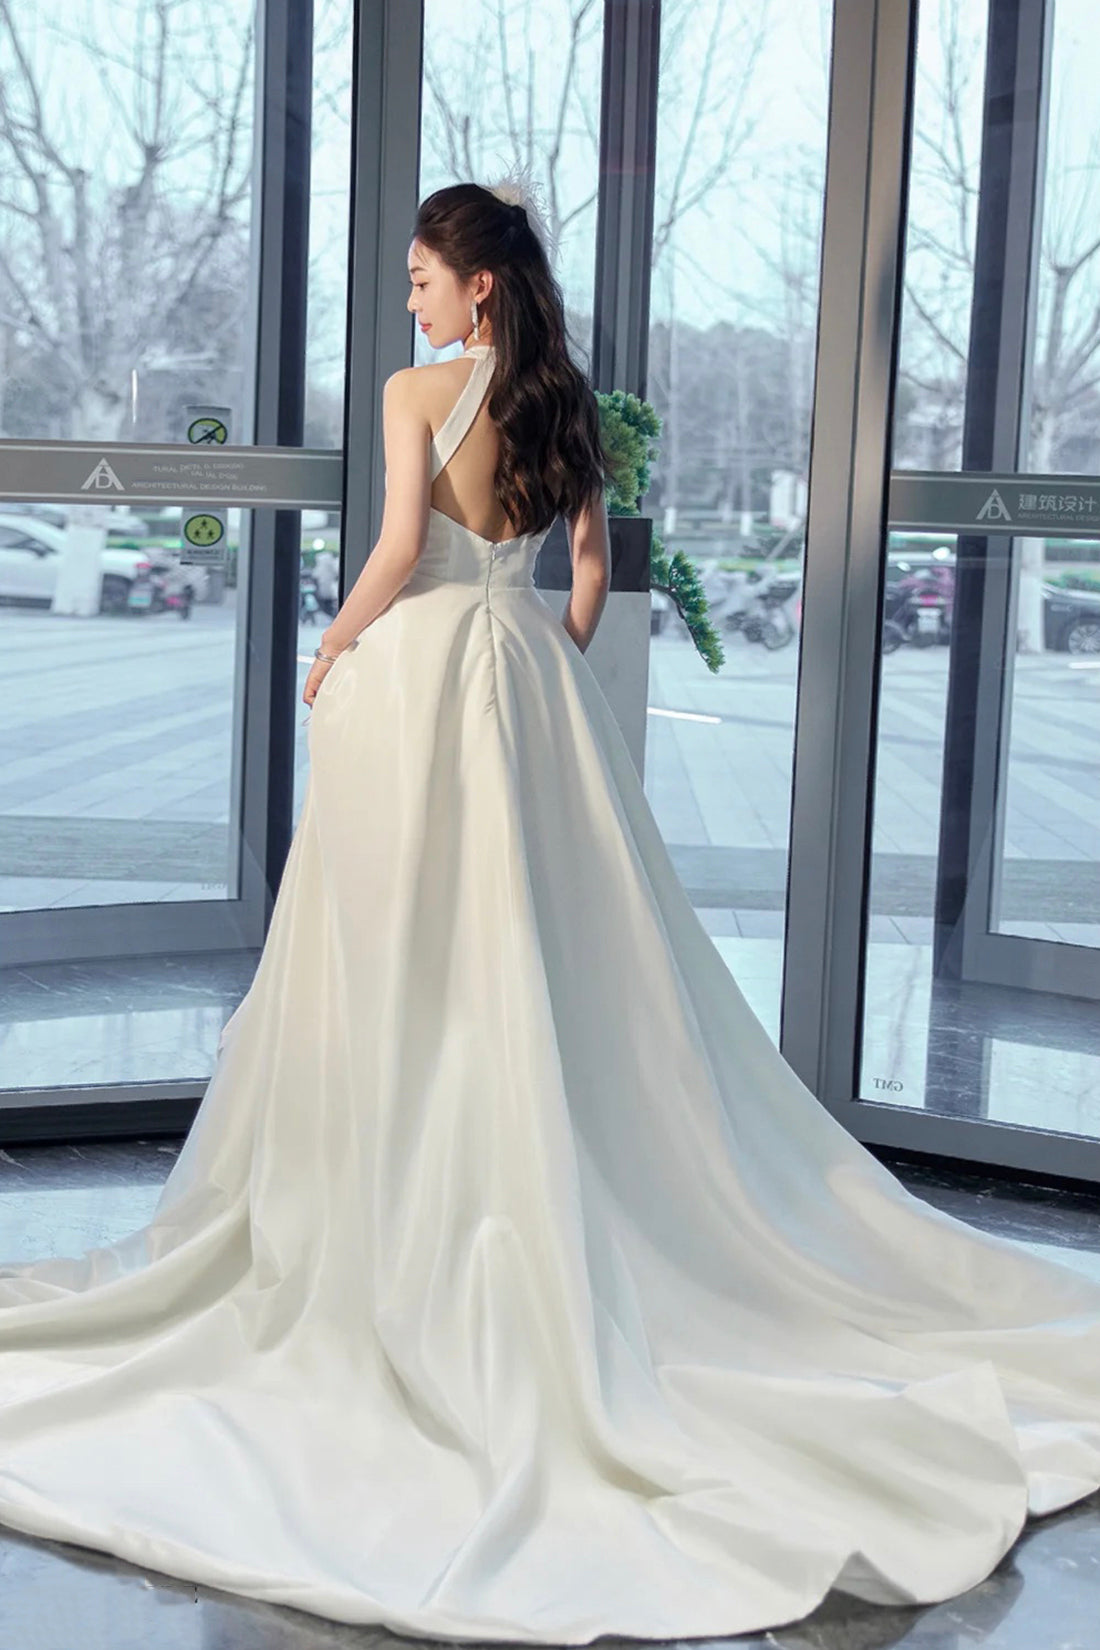 White Satin Long Prom Dress with Slit, Elegant A-Line Backless Evening Party Dress